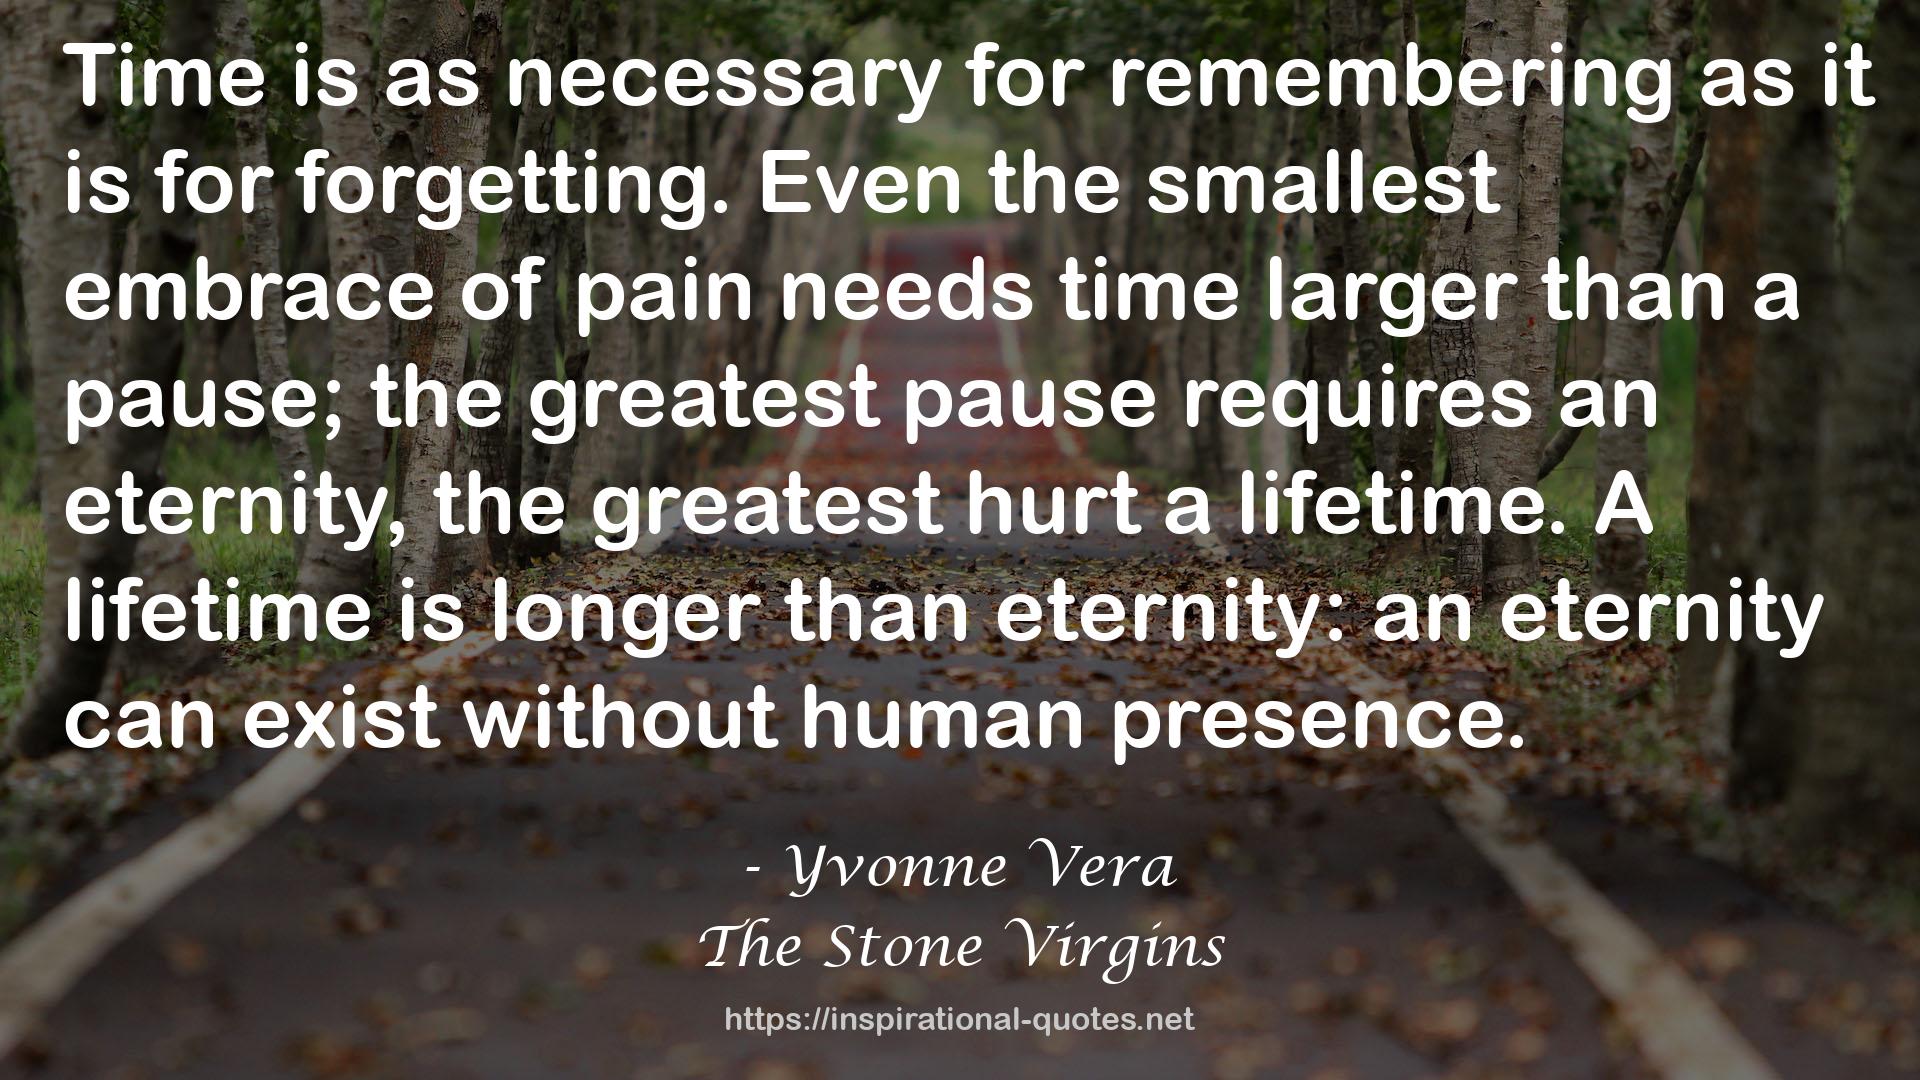 The Stone Virgins QUOTES